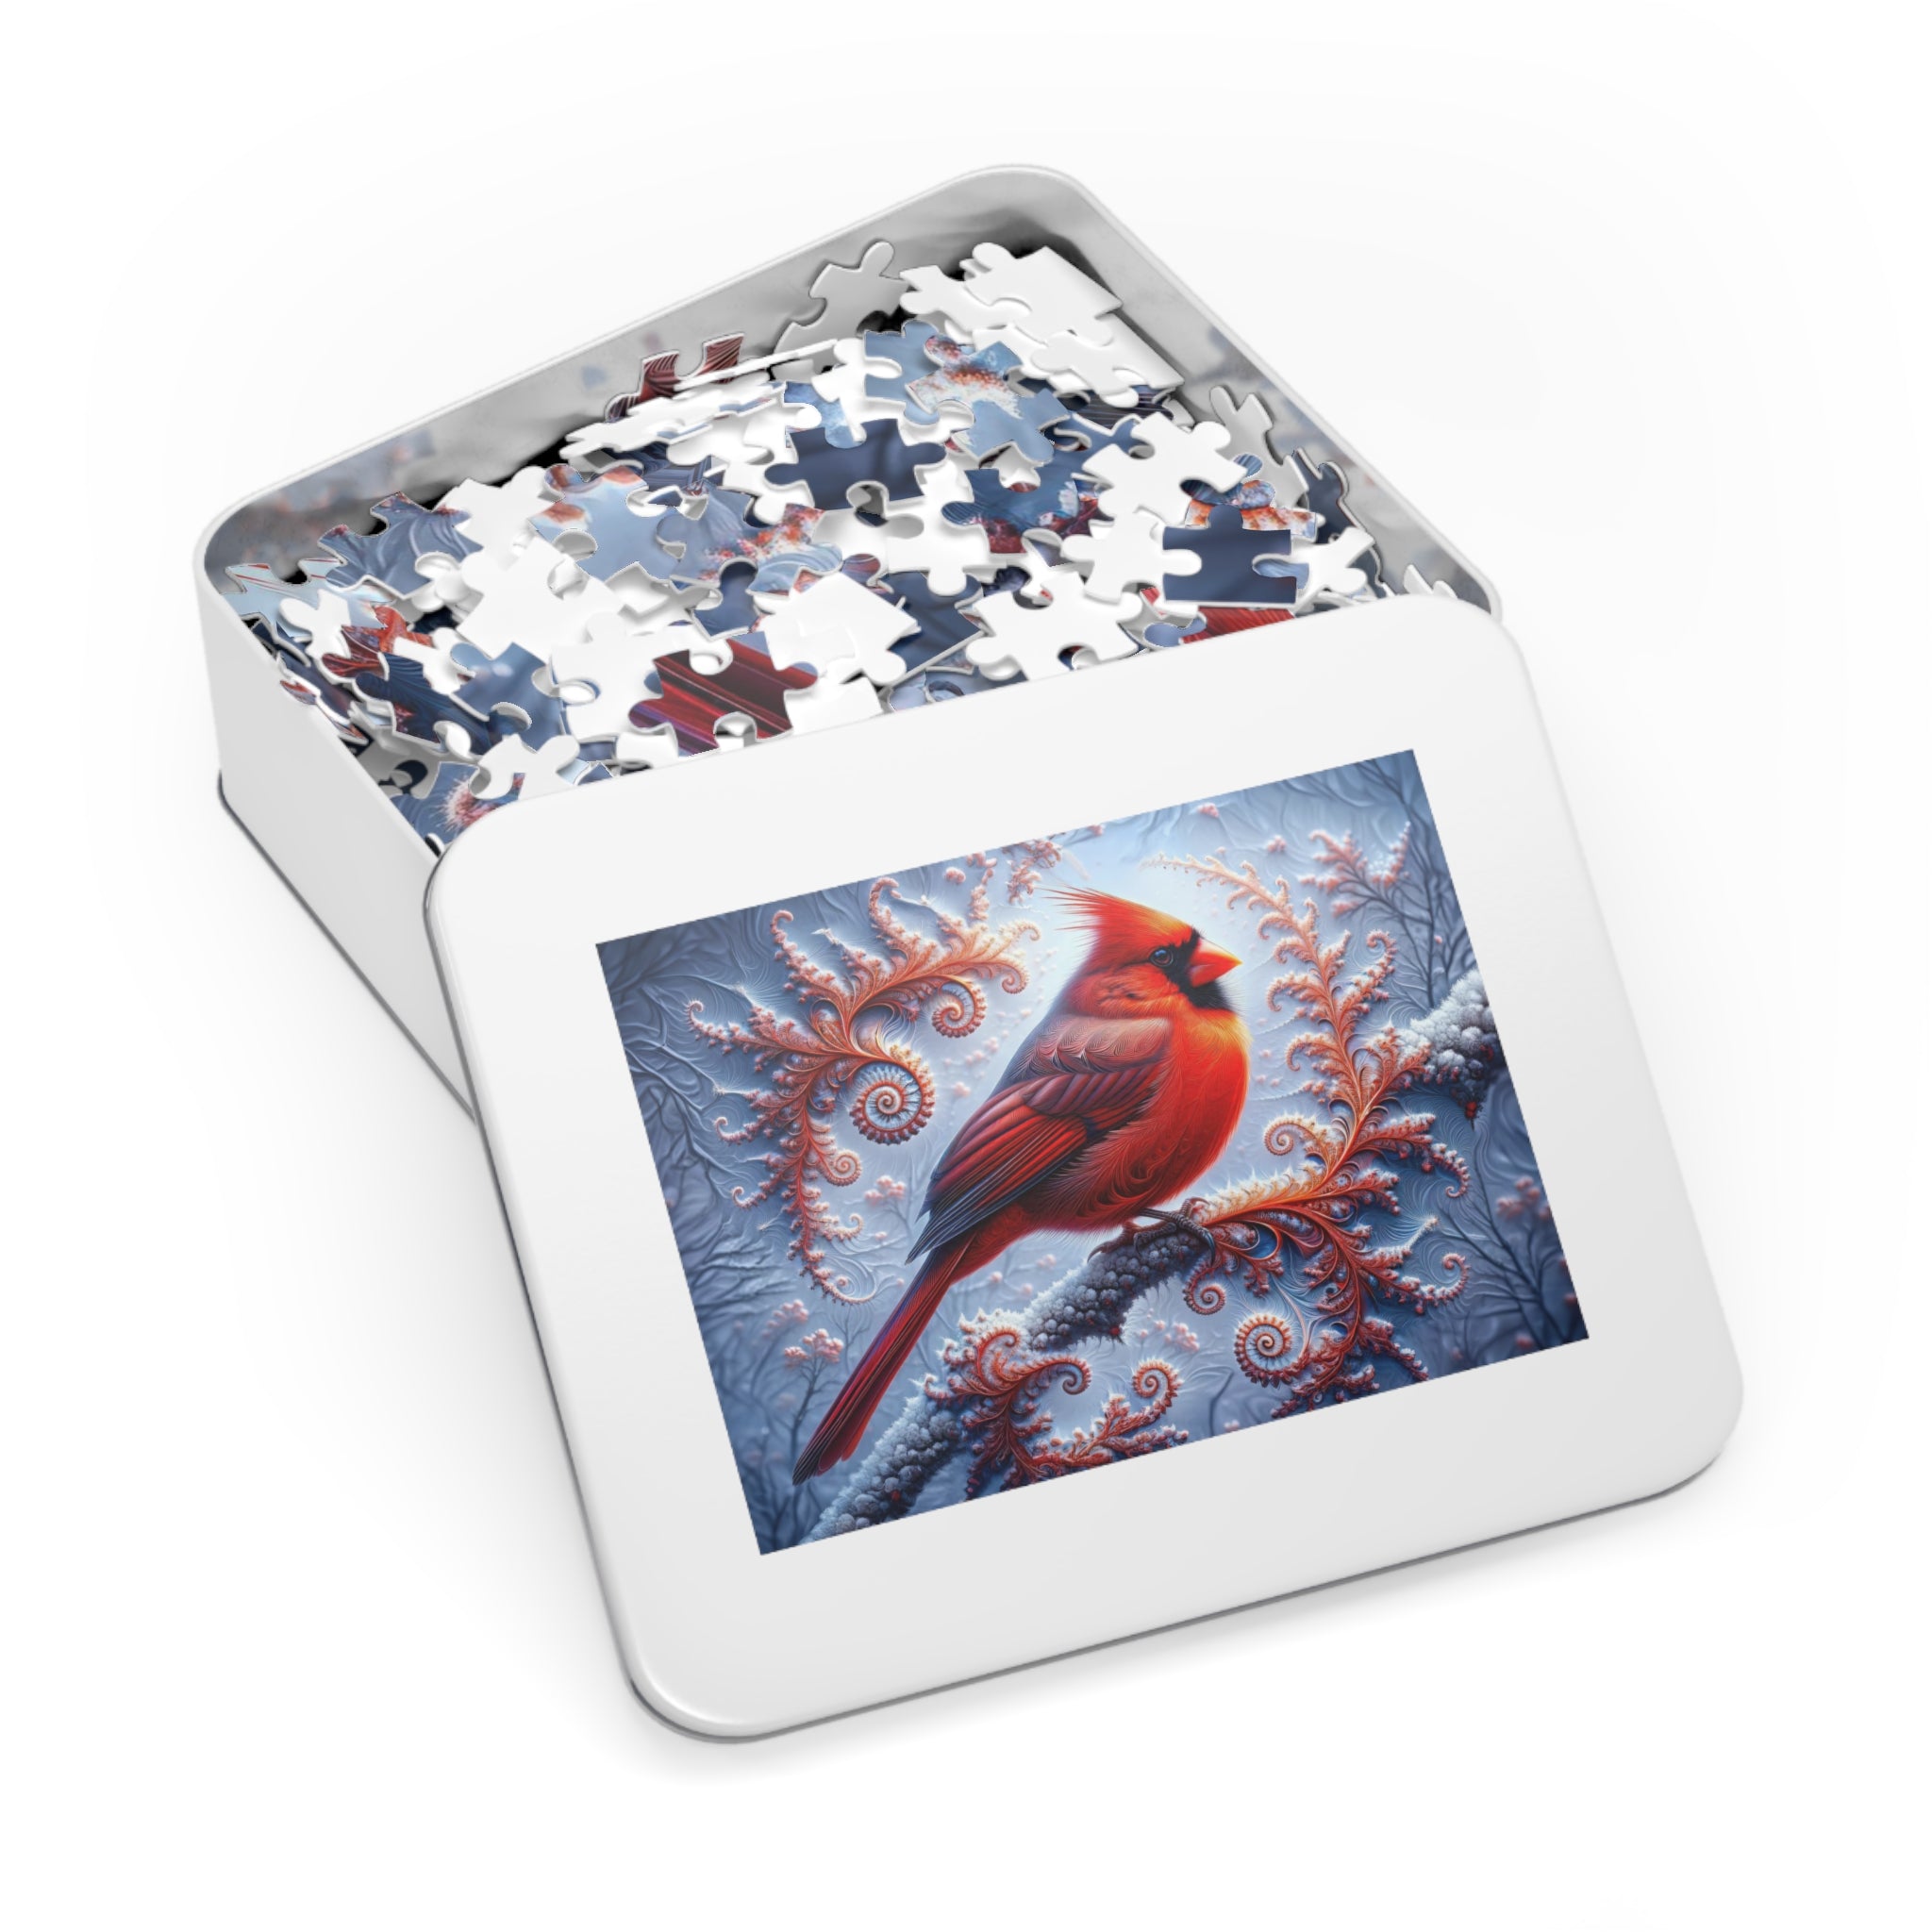 The Cardinal's Fractal Winter Jigsaw Puzzle